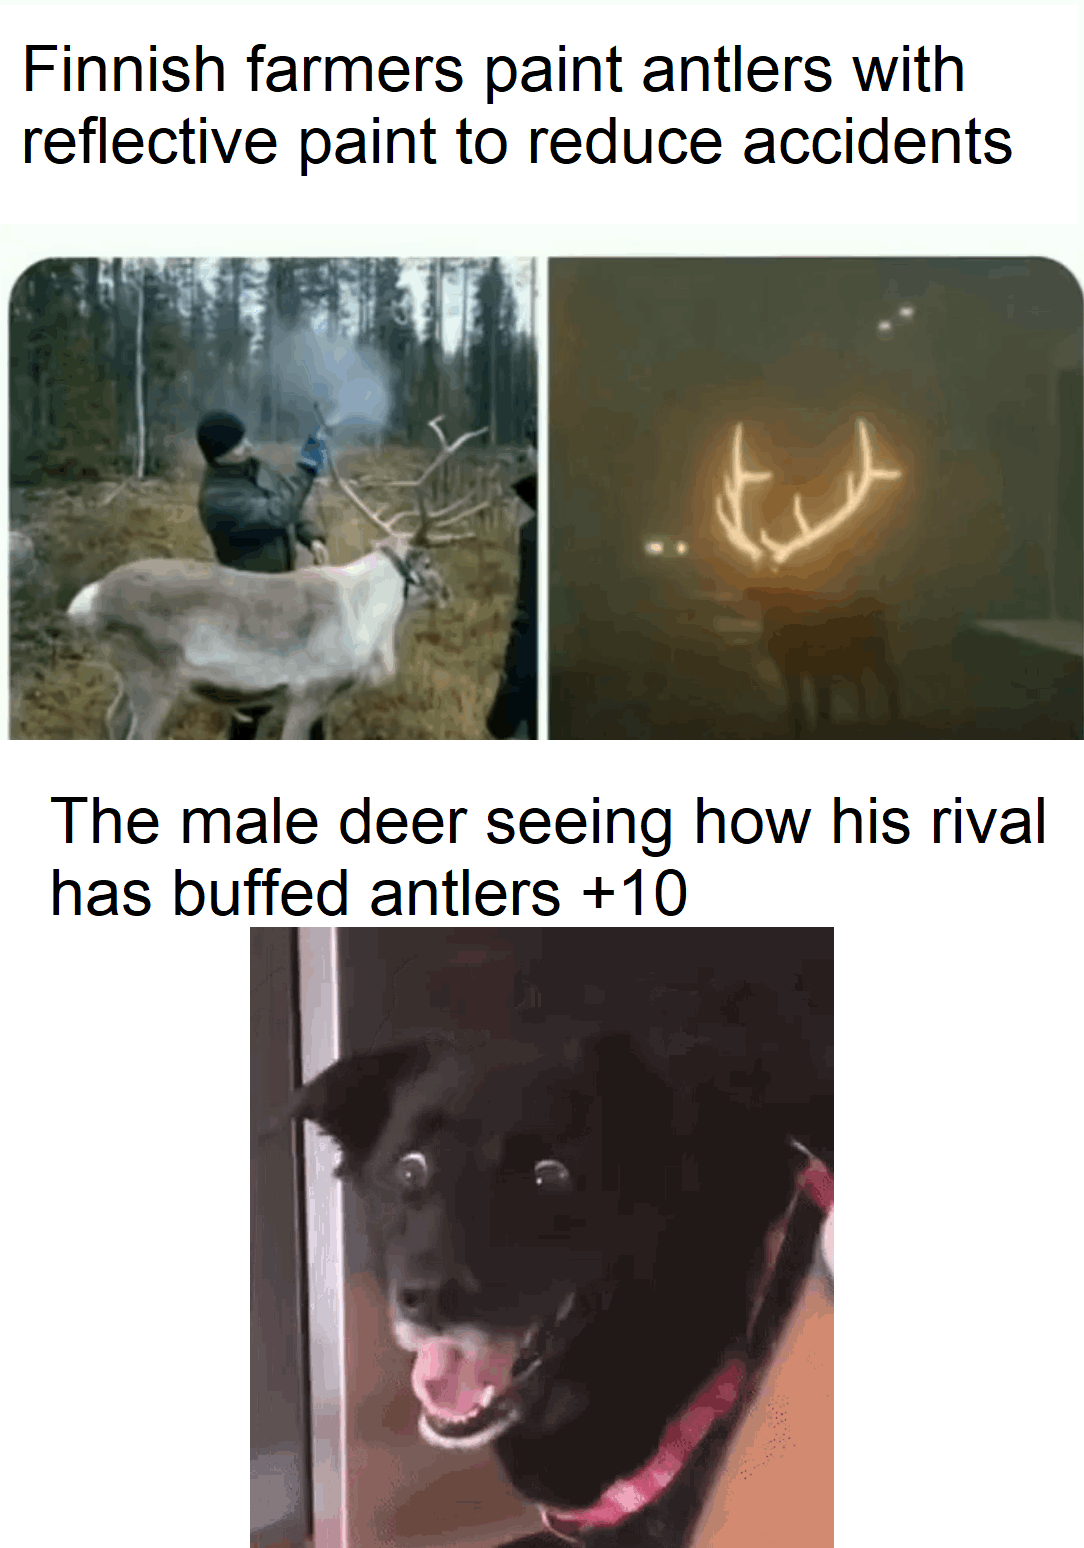 dank memes - dog - Finnish farmers paint antlers with reflective paint to reduce accidents The male deer seeing how his rival has buffed antlers 10